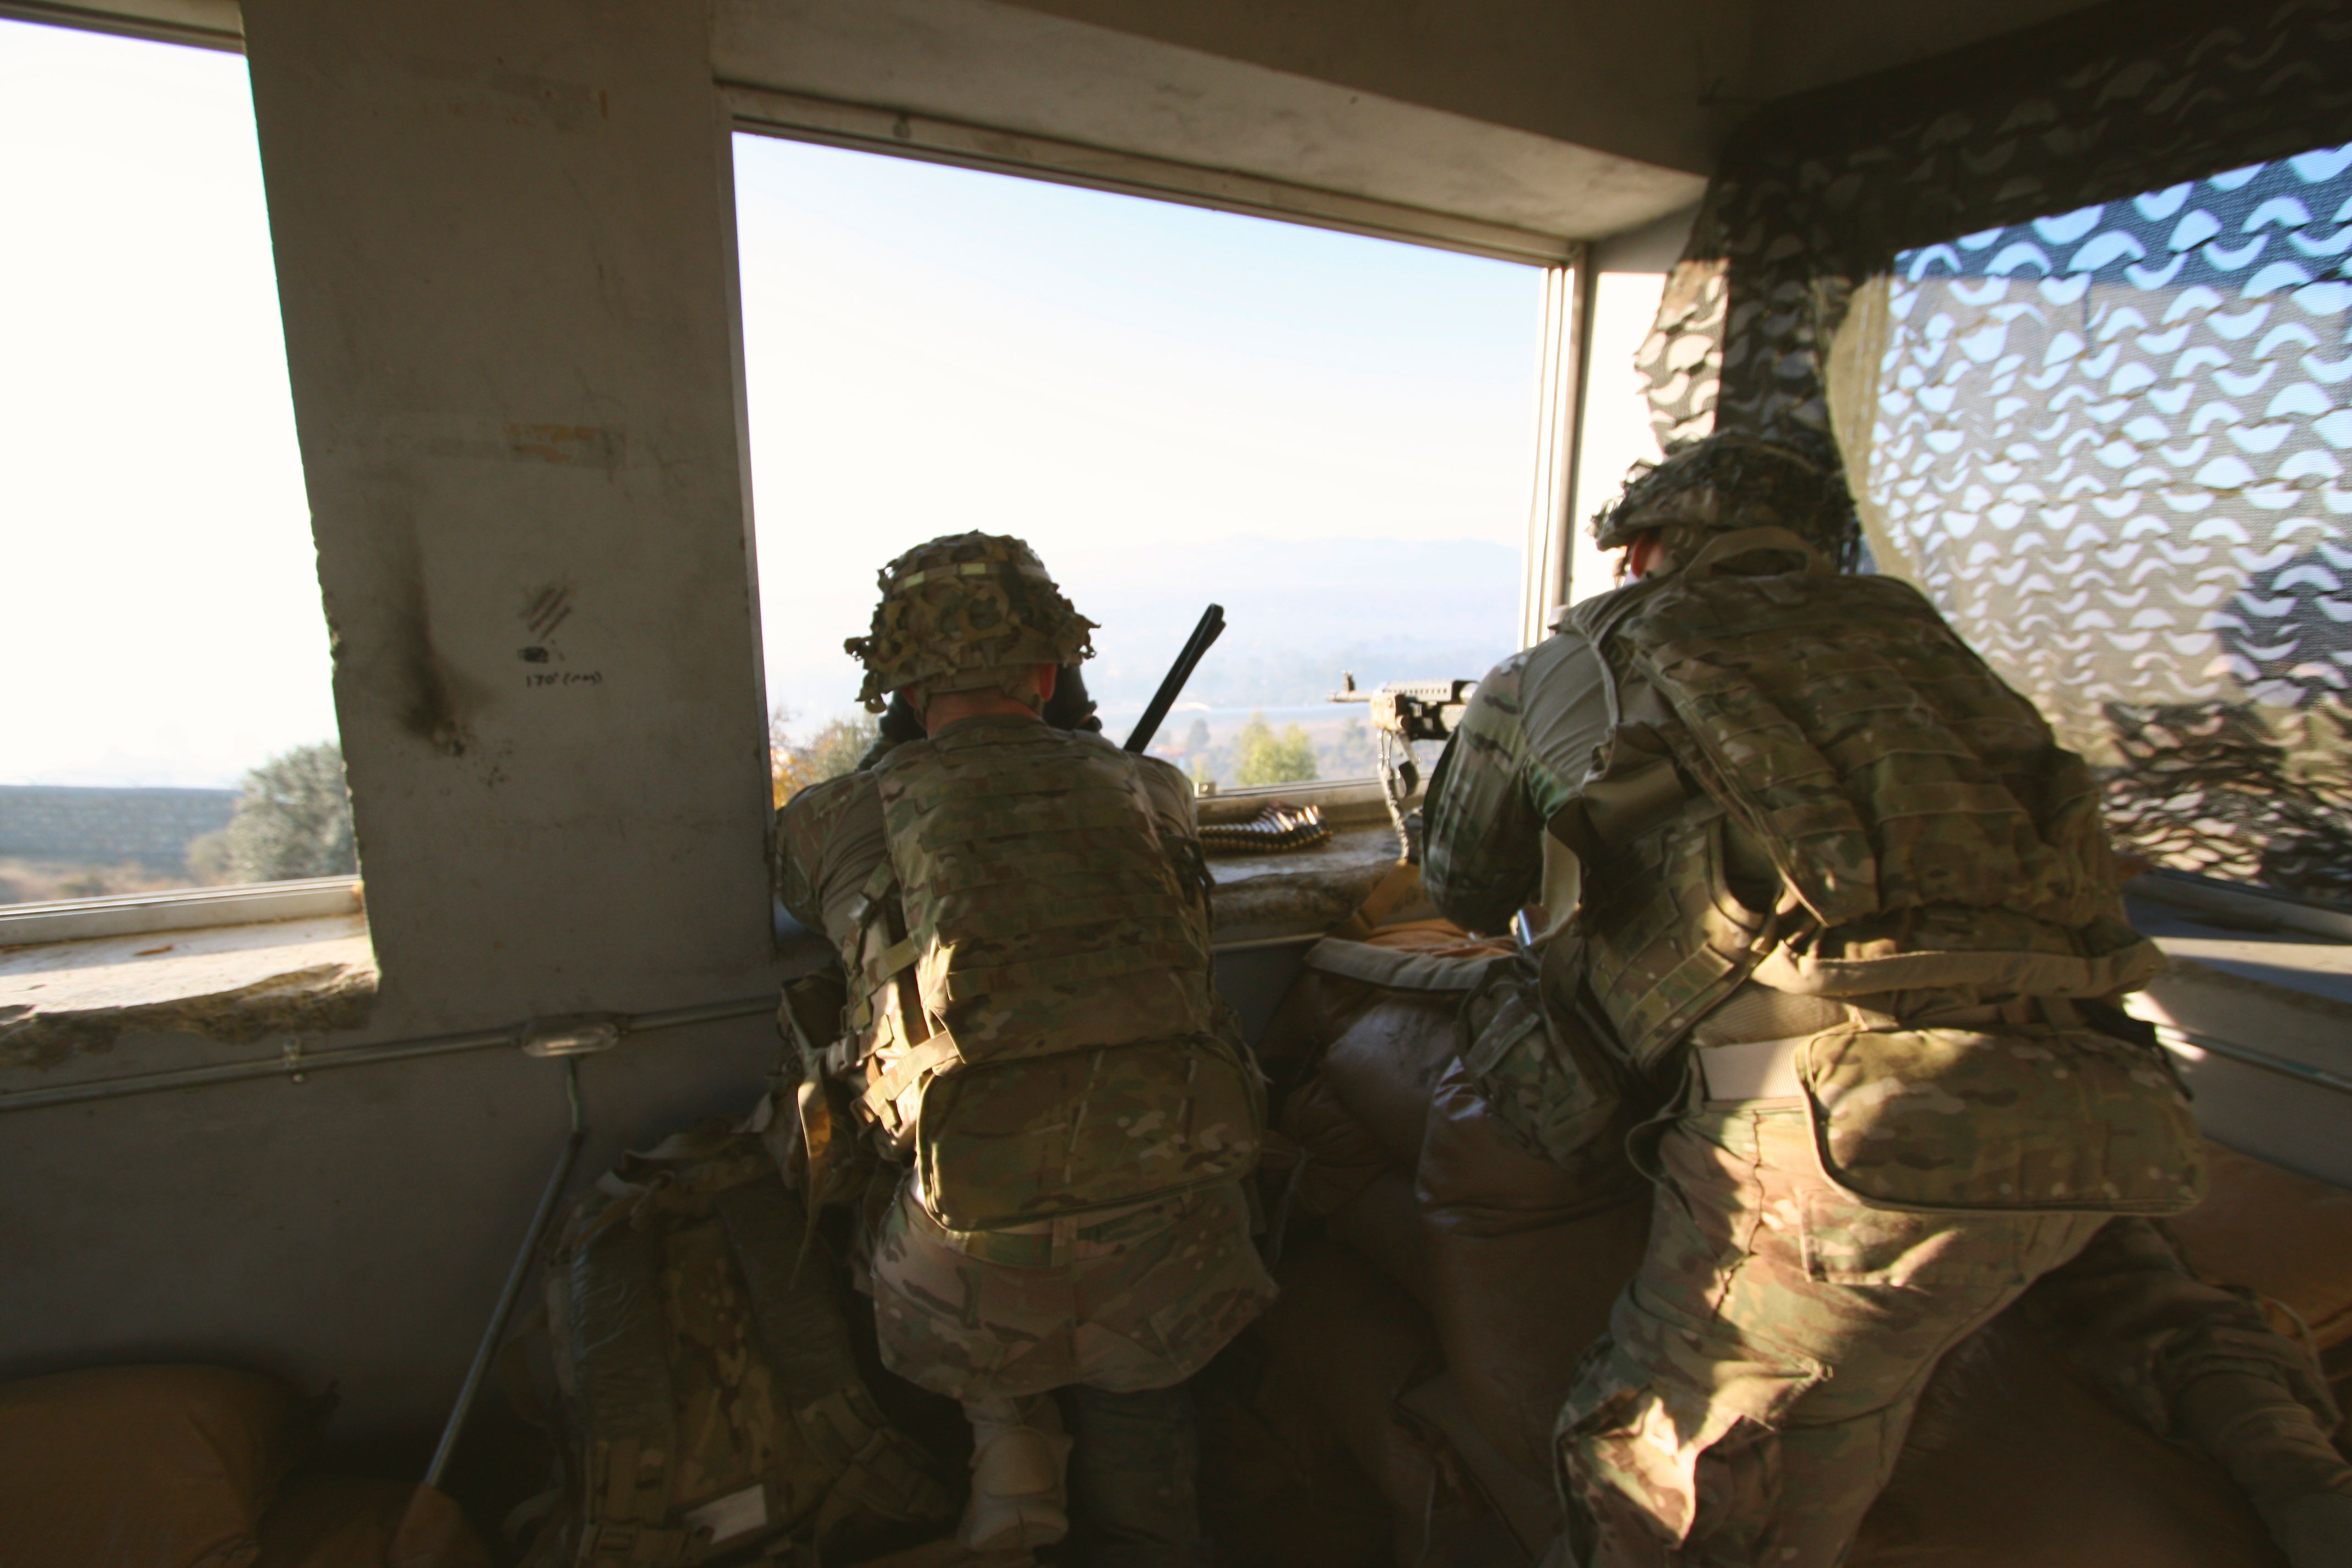 Fifteen years after 9/11, the U.S. military is still conducting operations in Afghanistan and Iraq.